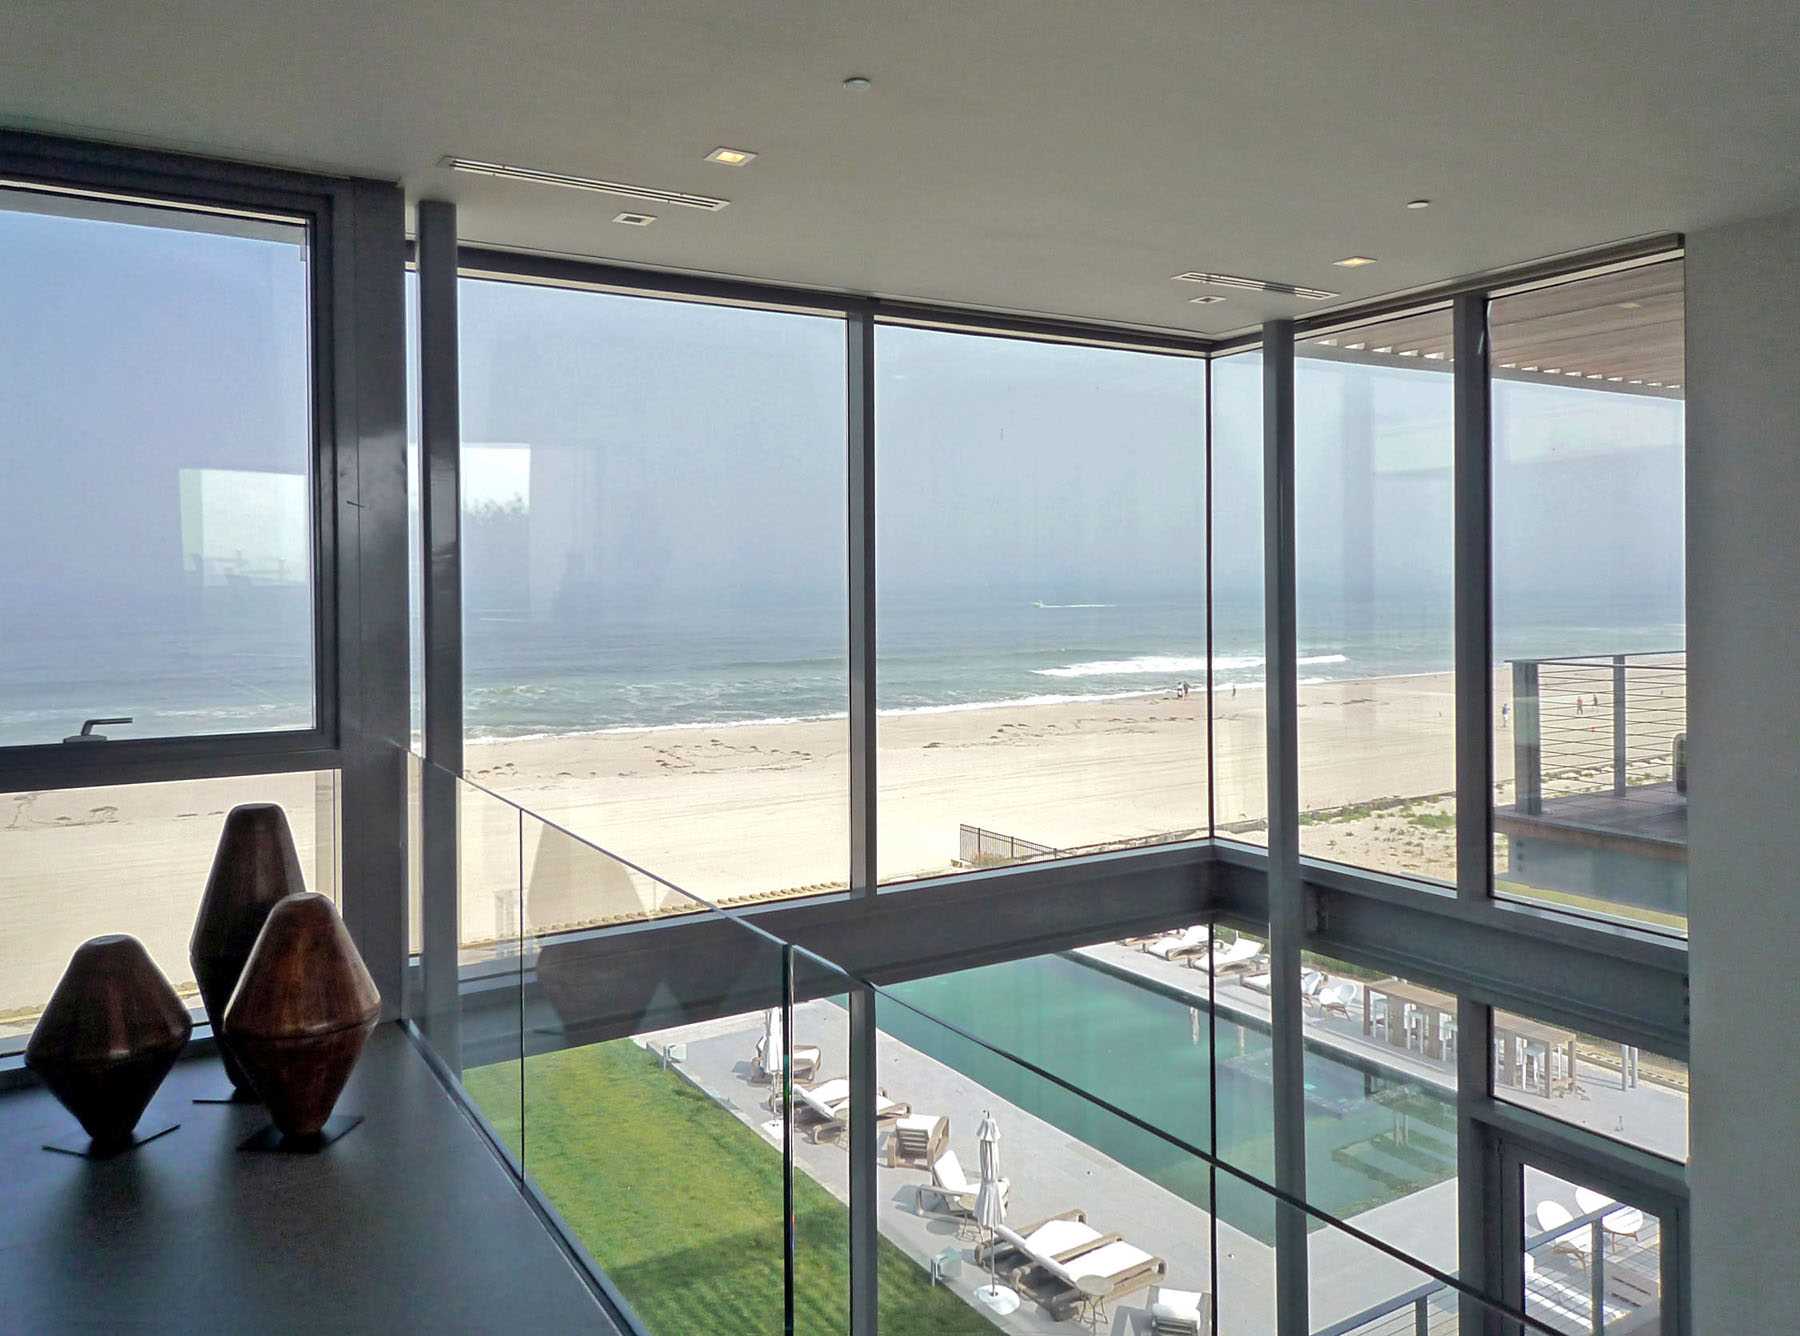 A modern hurricane-proof house with missile?impact windows that can resist 150 mph winds.